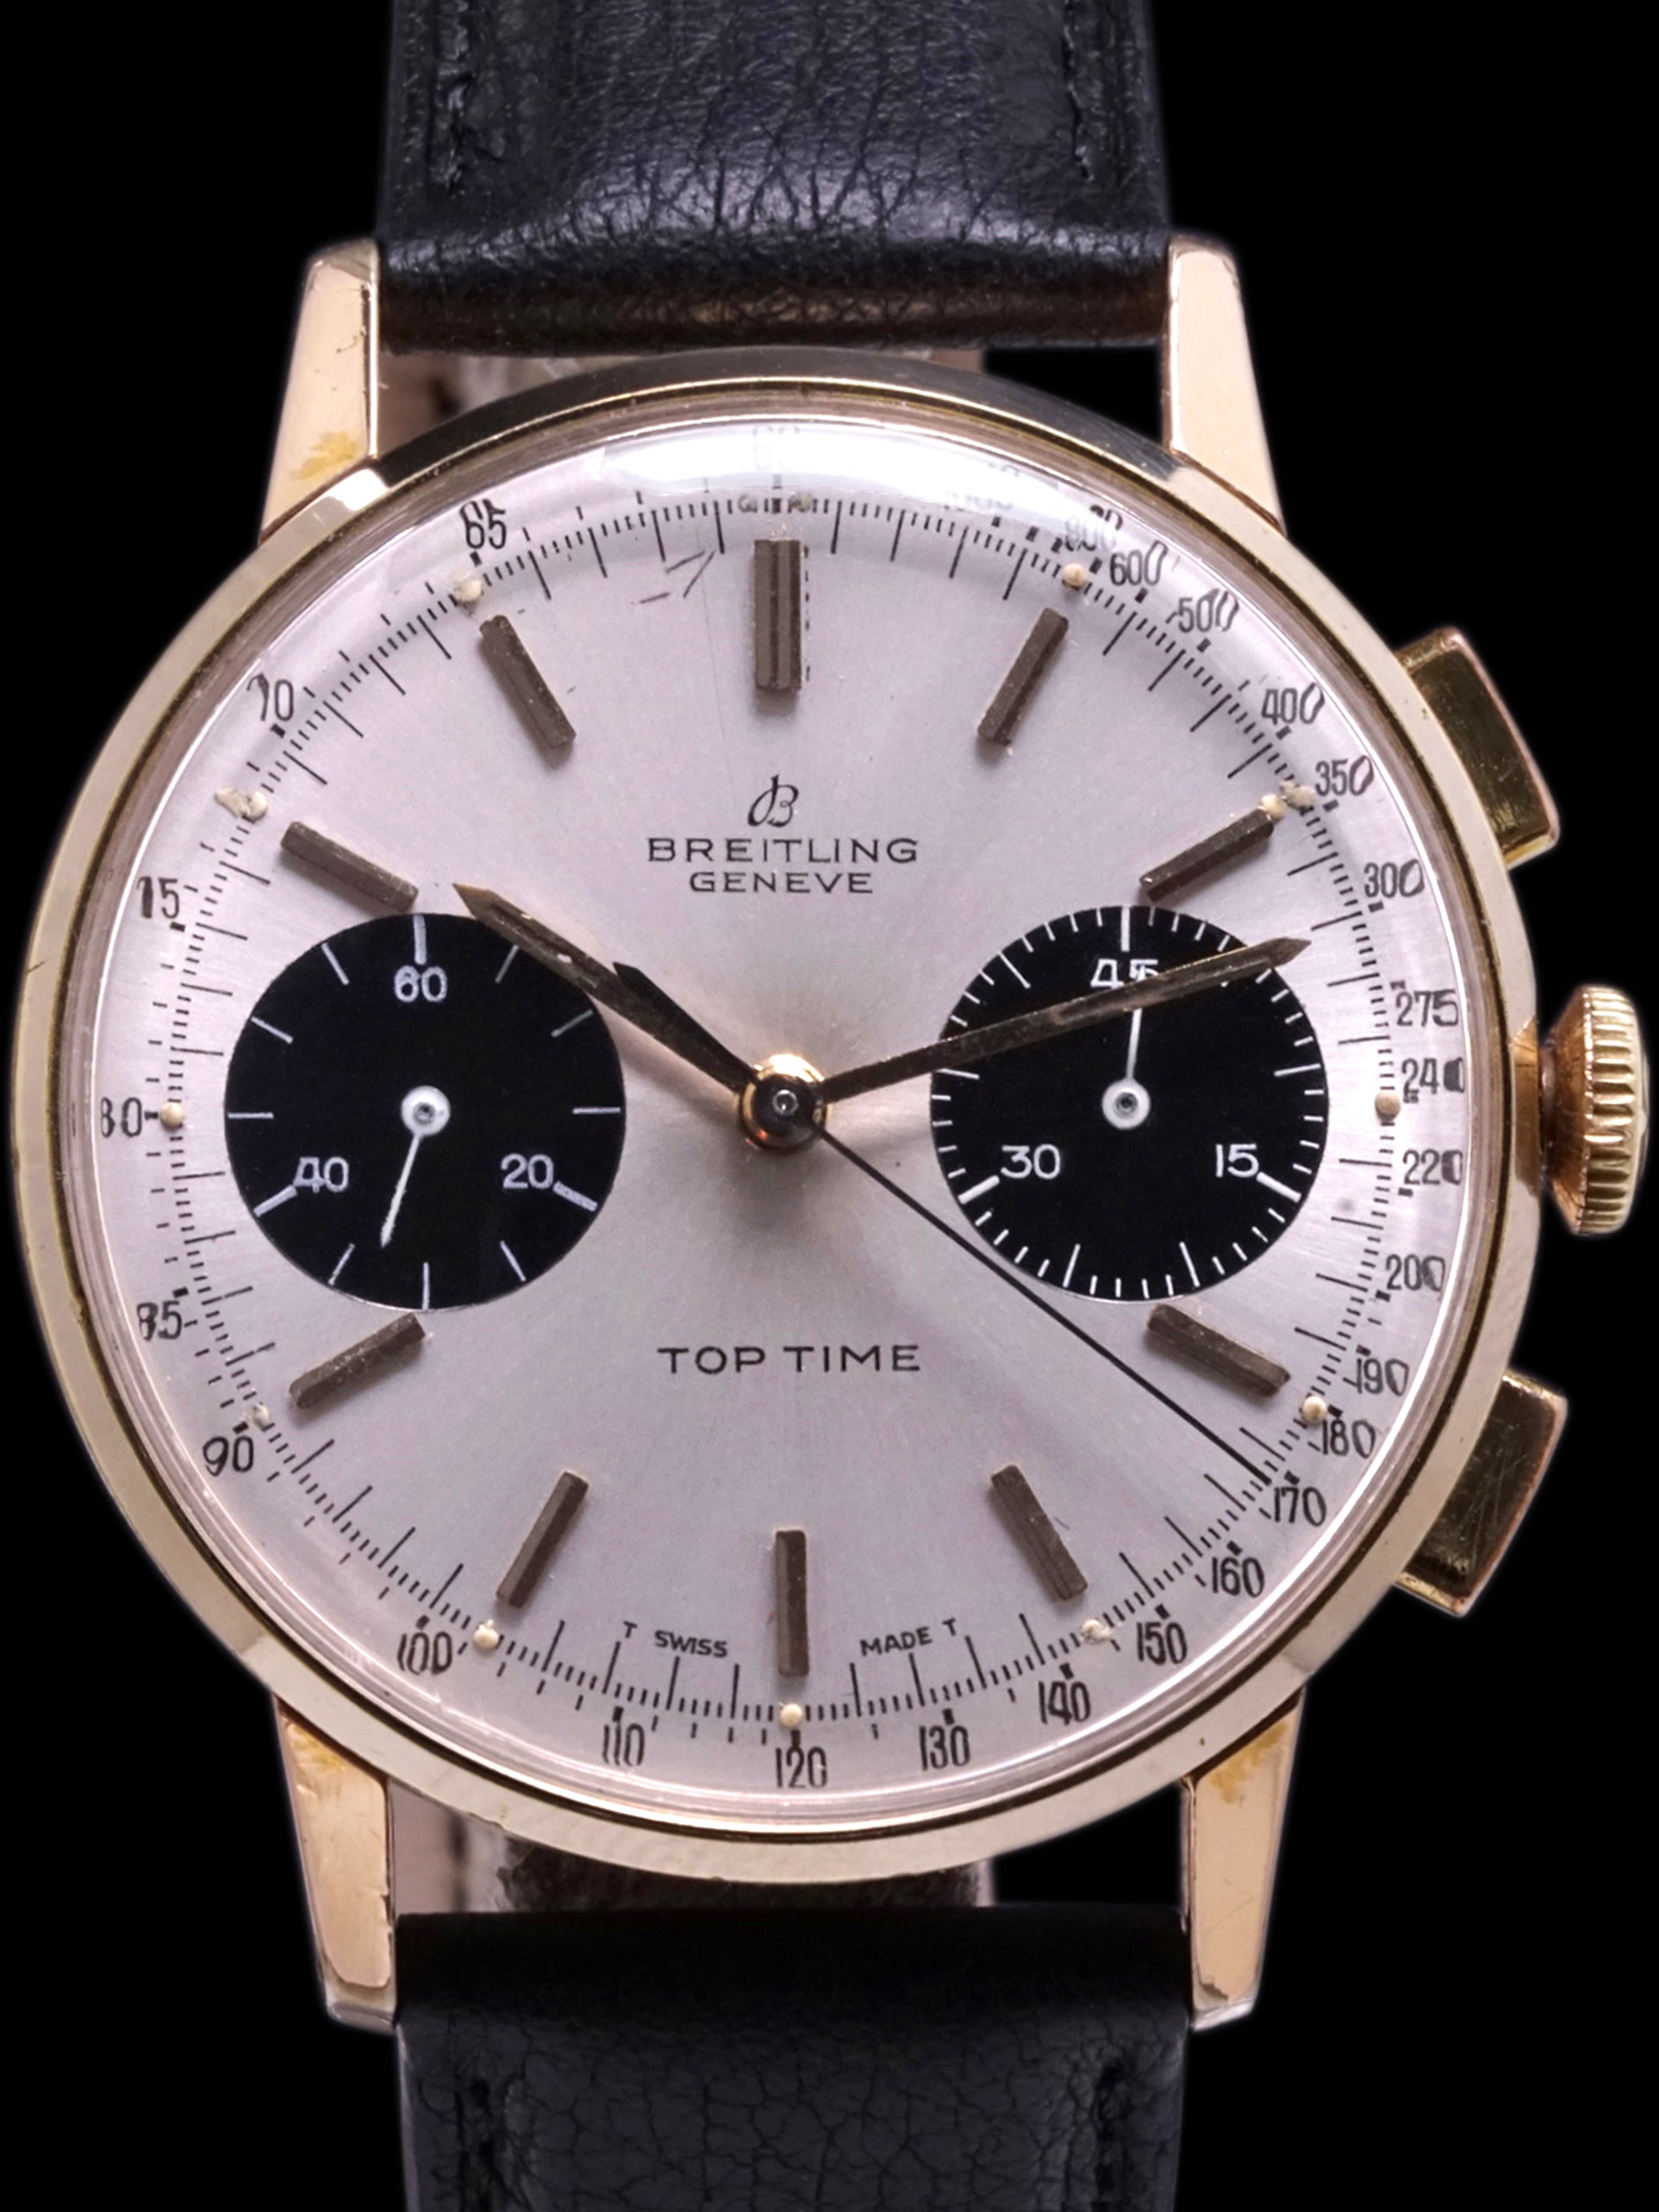 1964 Breitling Top Time Chronograph (Ref. 2000)